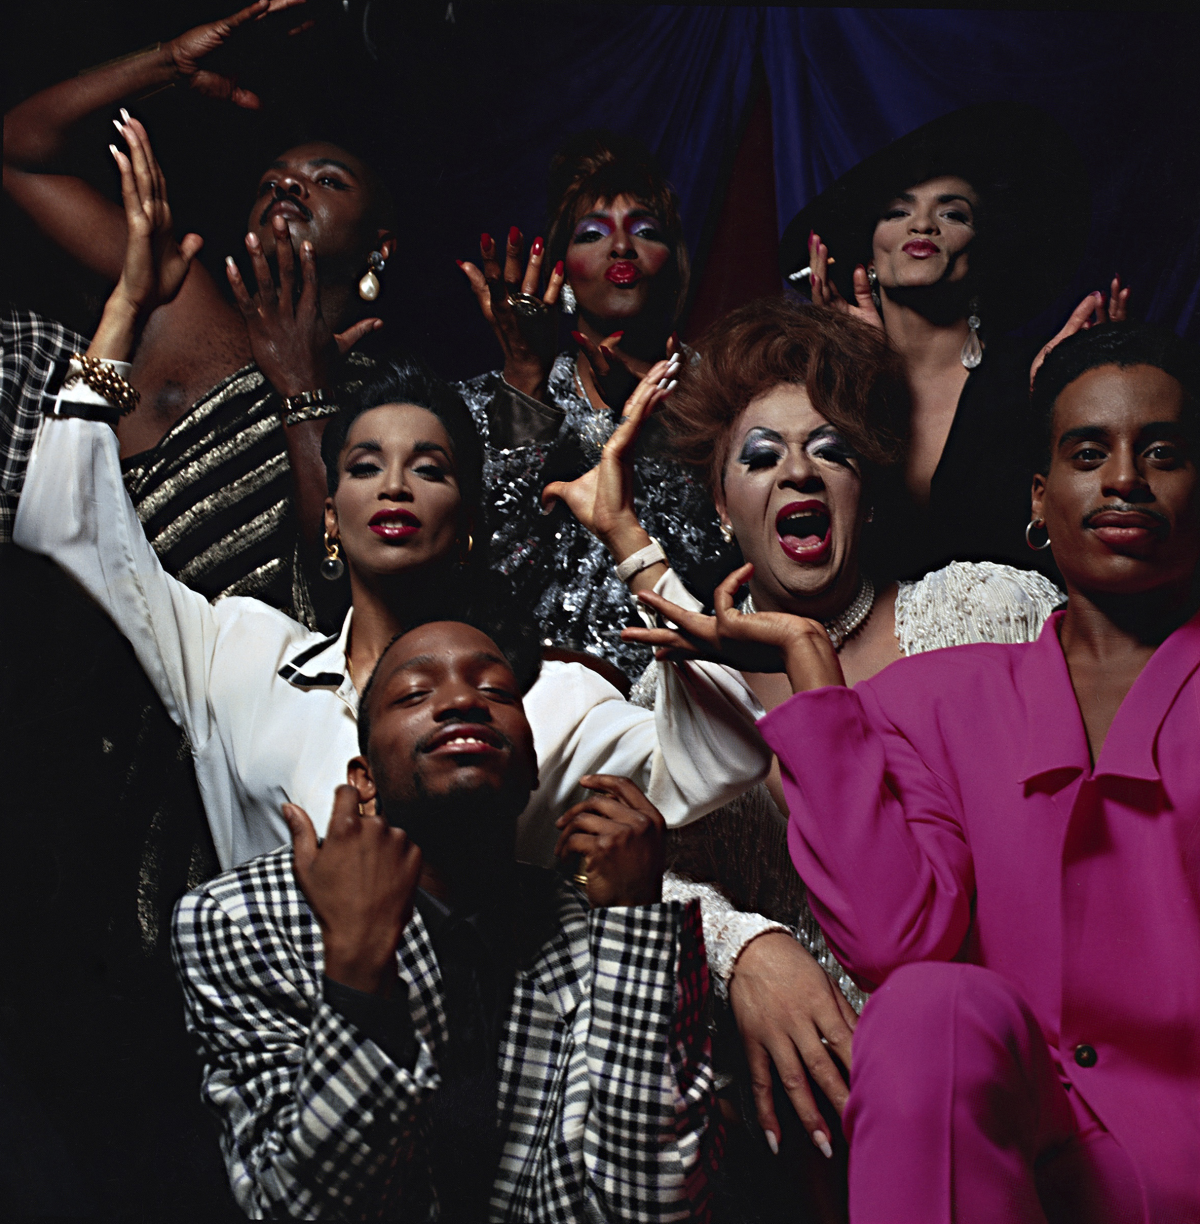 Drag queens and dancers pose for a loving camera.